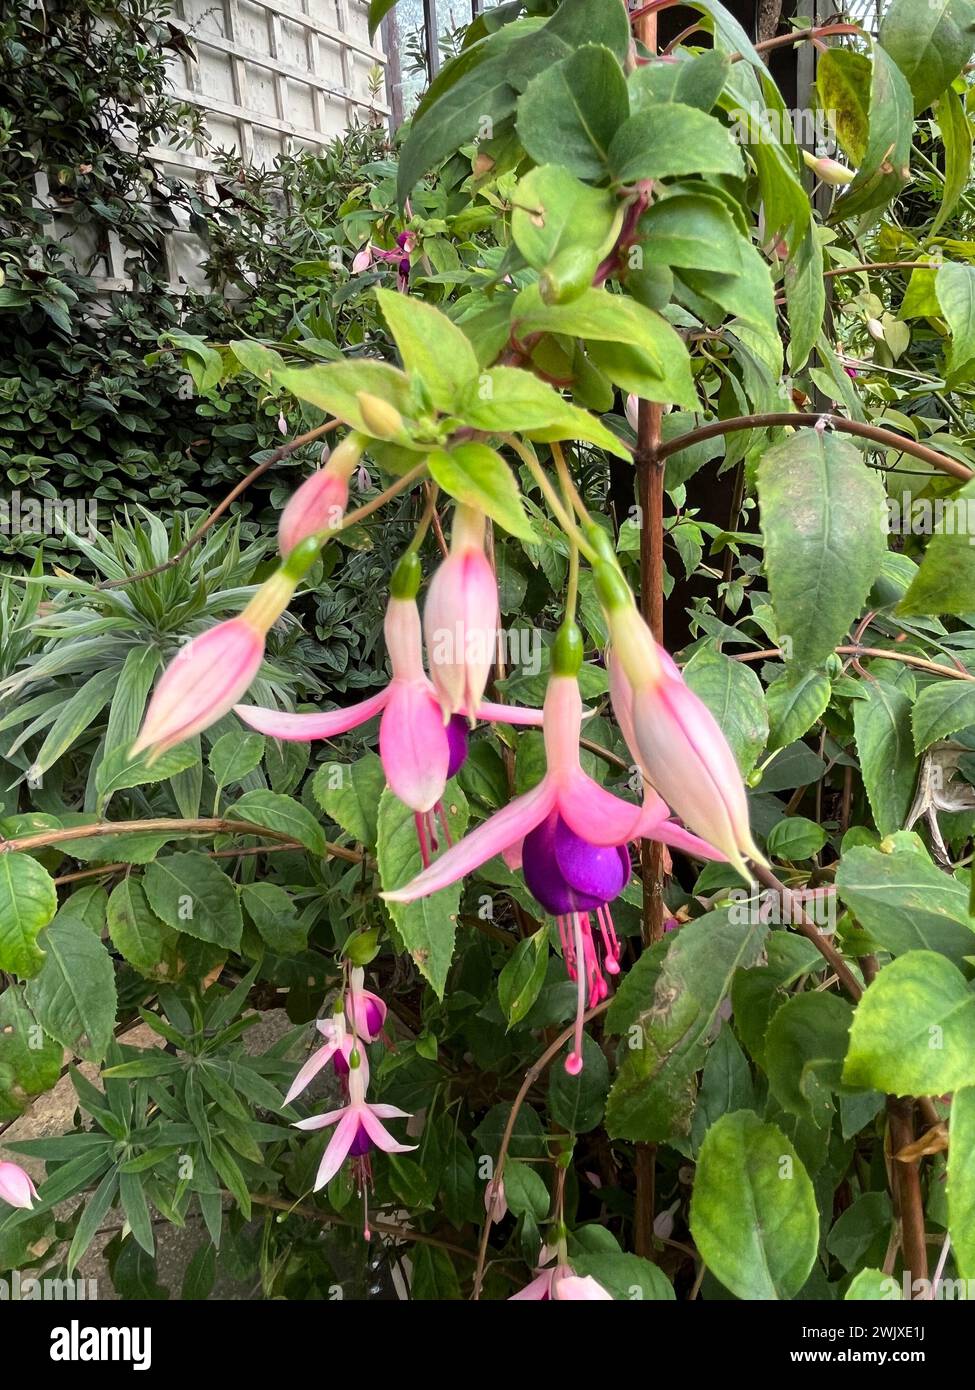 A cluster of pink fuchsia flowers growing in a glasshouse with assorted vegetation around with many assorted shapes of leaf and foliage. Stock Photo